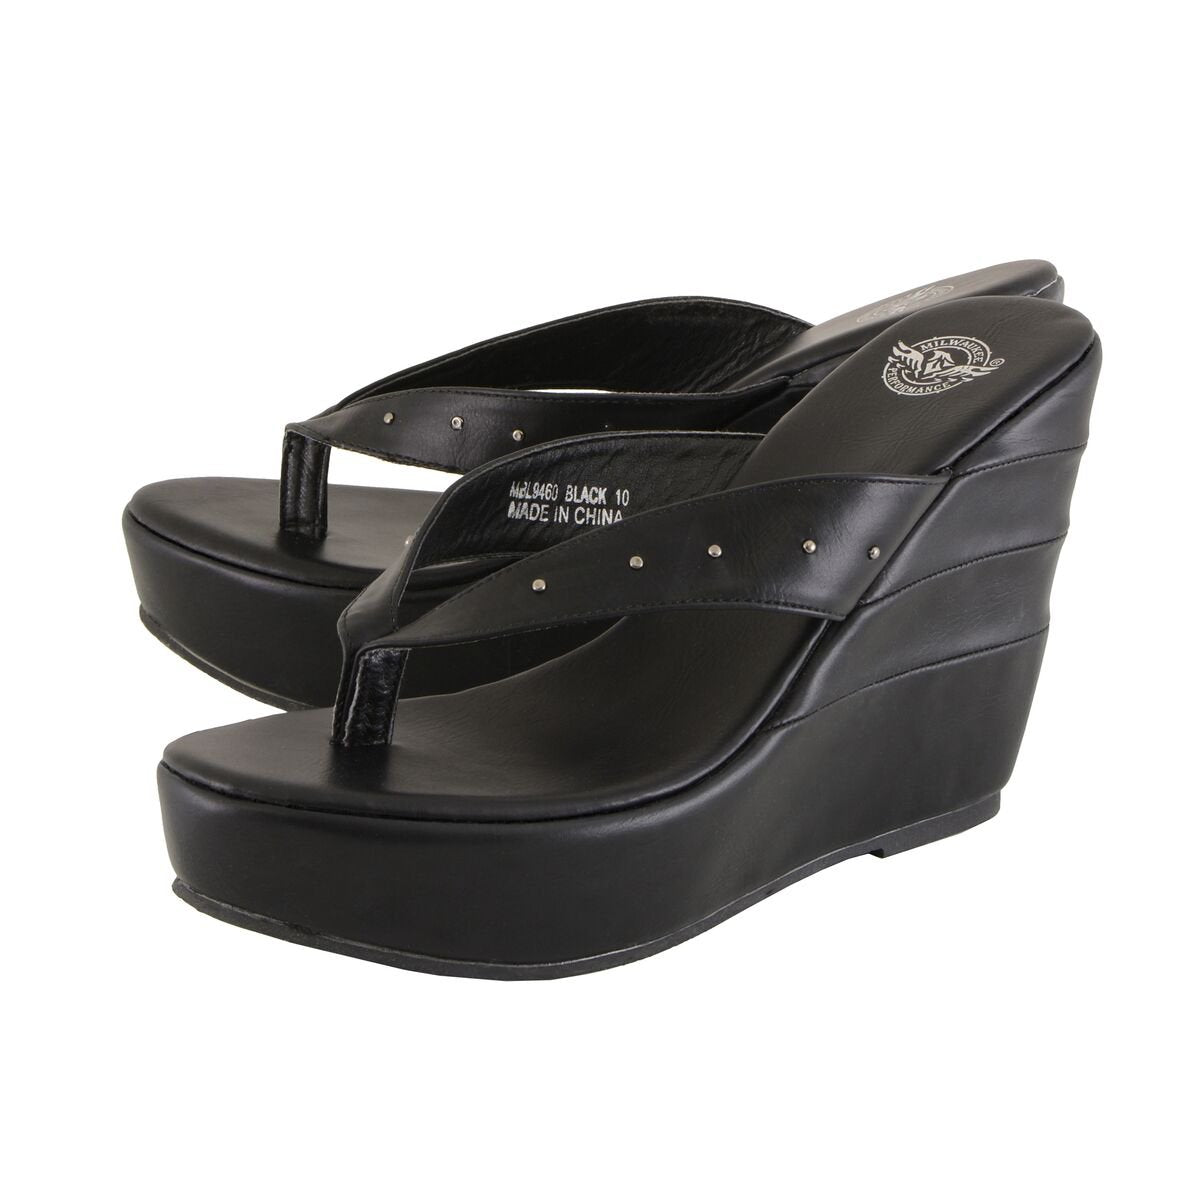 Milwaukee Performance MBL9460 Women's Black Wedge Sandals with Studed Straps